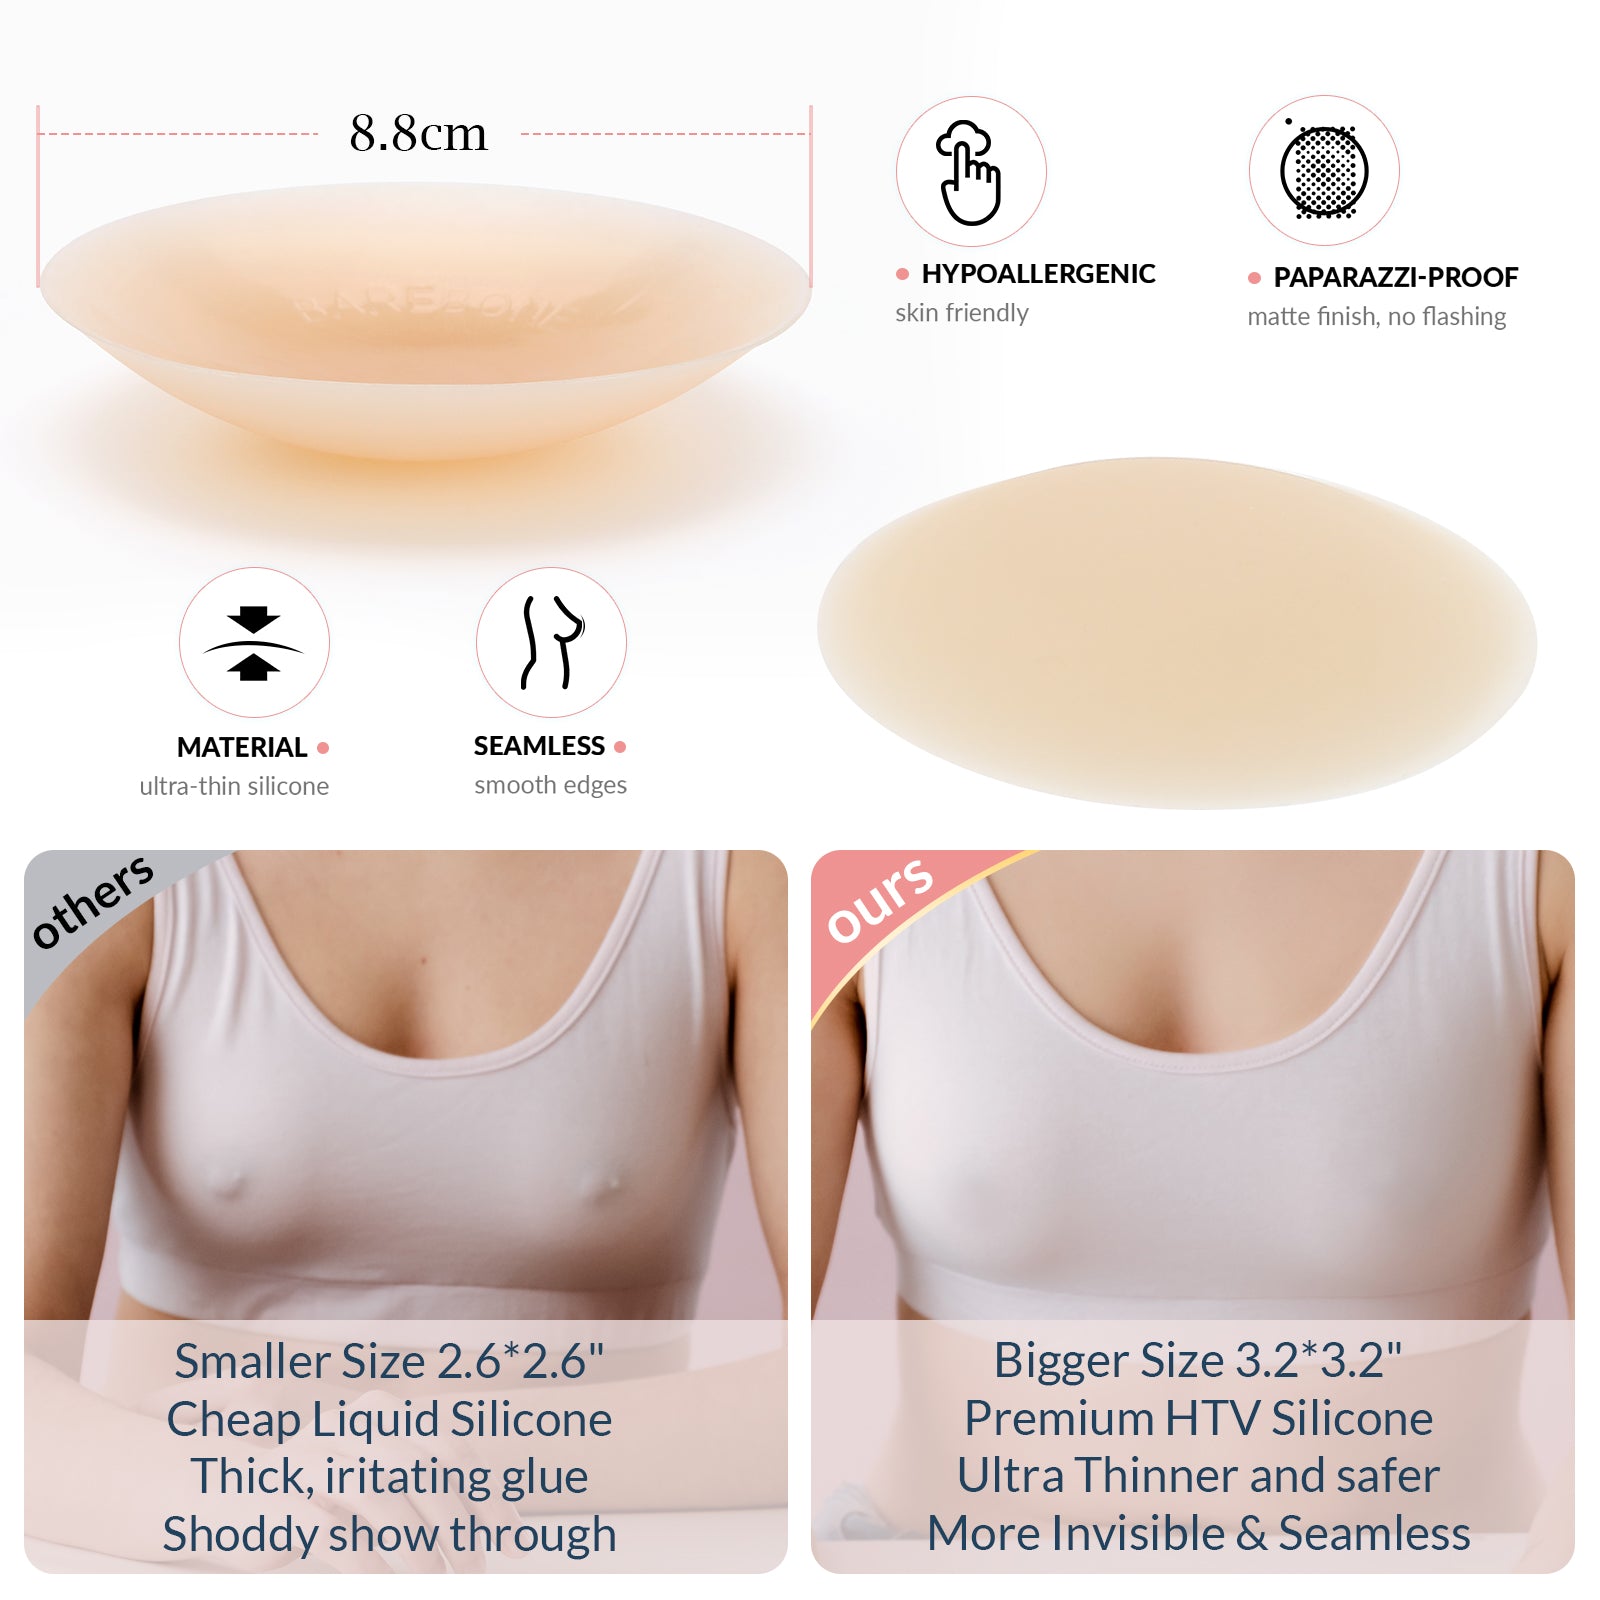 VBT Lifting Boob Tape/Lingerie Set-1 Roll of Breast Lift Tape with 5 Pairs  Satin Breast Petals/Push-up Bra, 1 Pair Silicone Nipple Stickers/self  Adhesive Bra and 36 PCS Double Sided Tape Lingerie